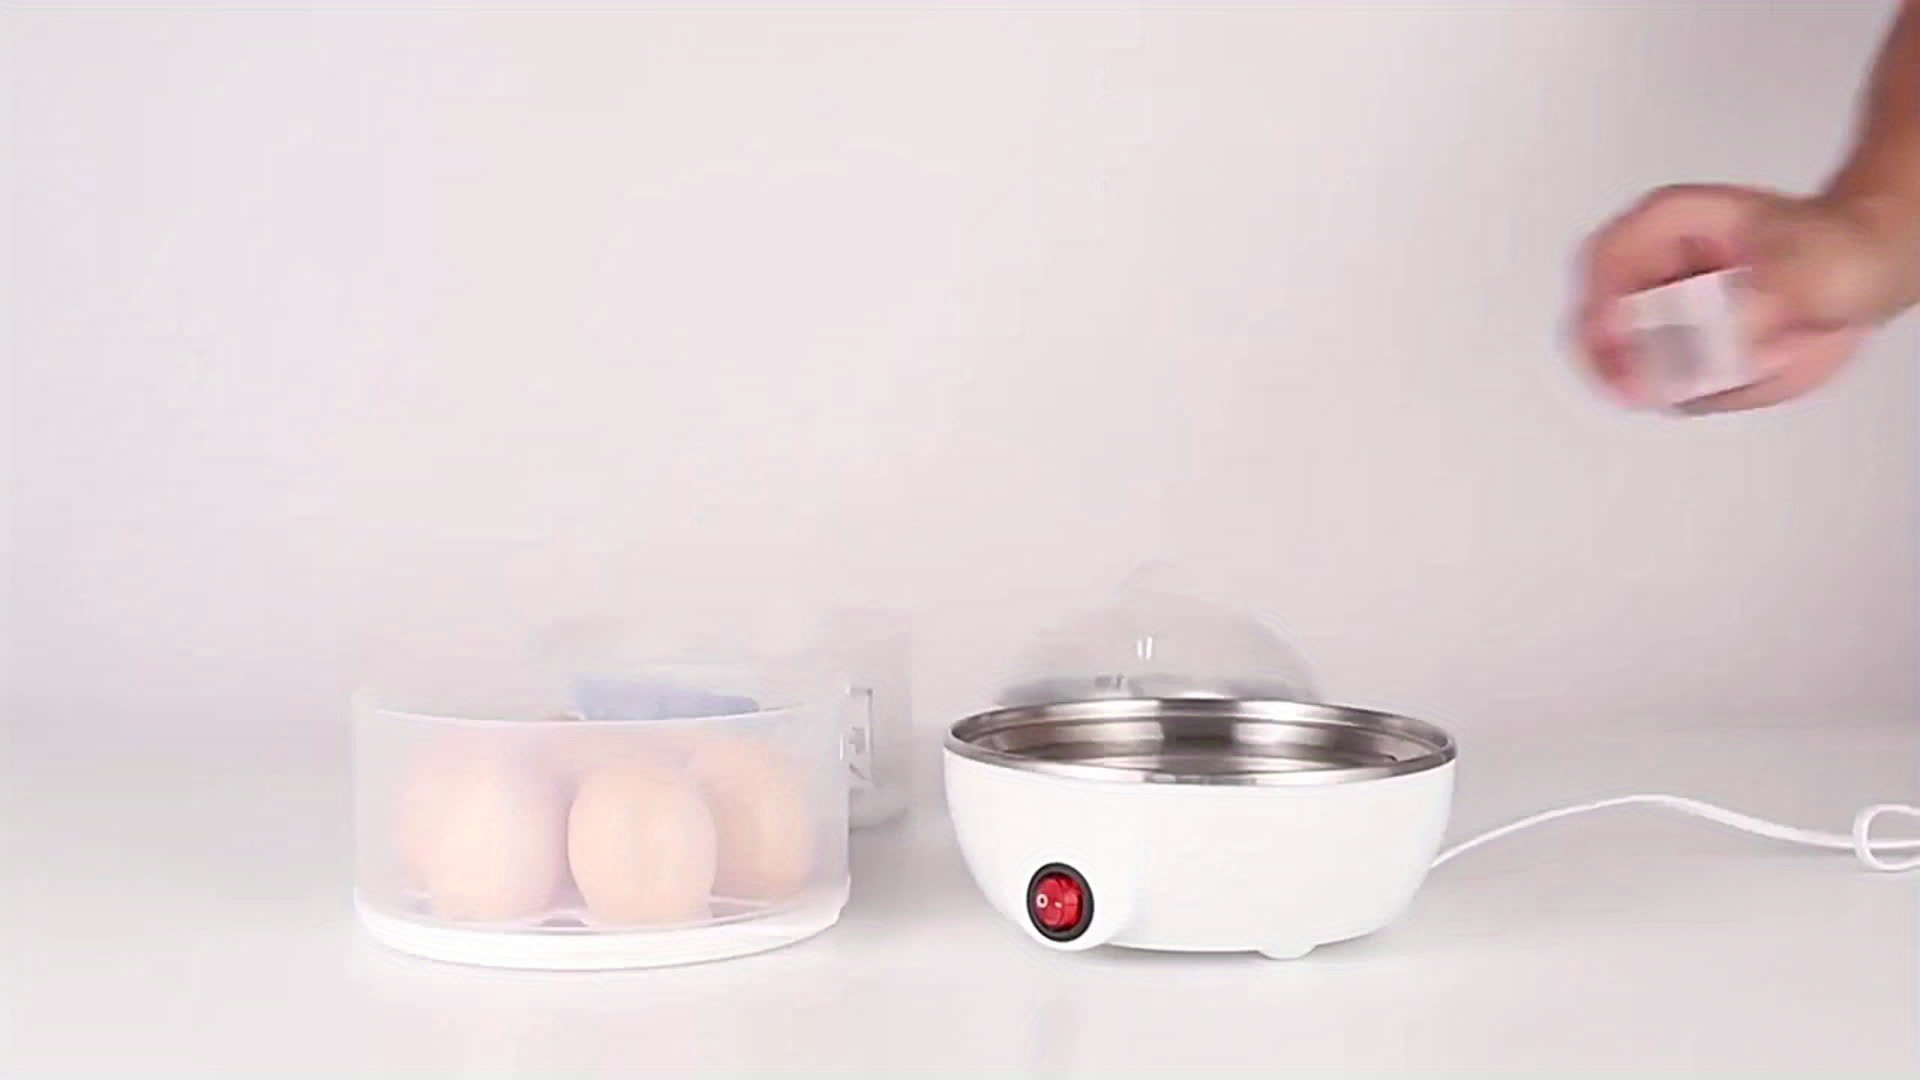 1pc Multifunctional Egg Cooker, Cute Egg Steamer, Automatic Power Outage,  Household Small 1 Person, Multifunctional Egg Steamer, Boiled Egg, Breakfast